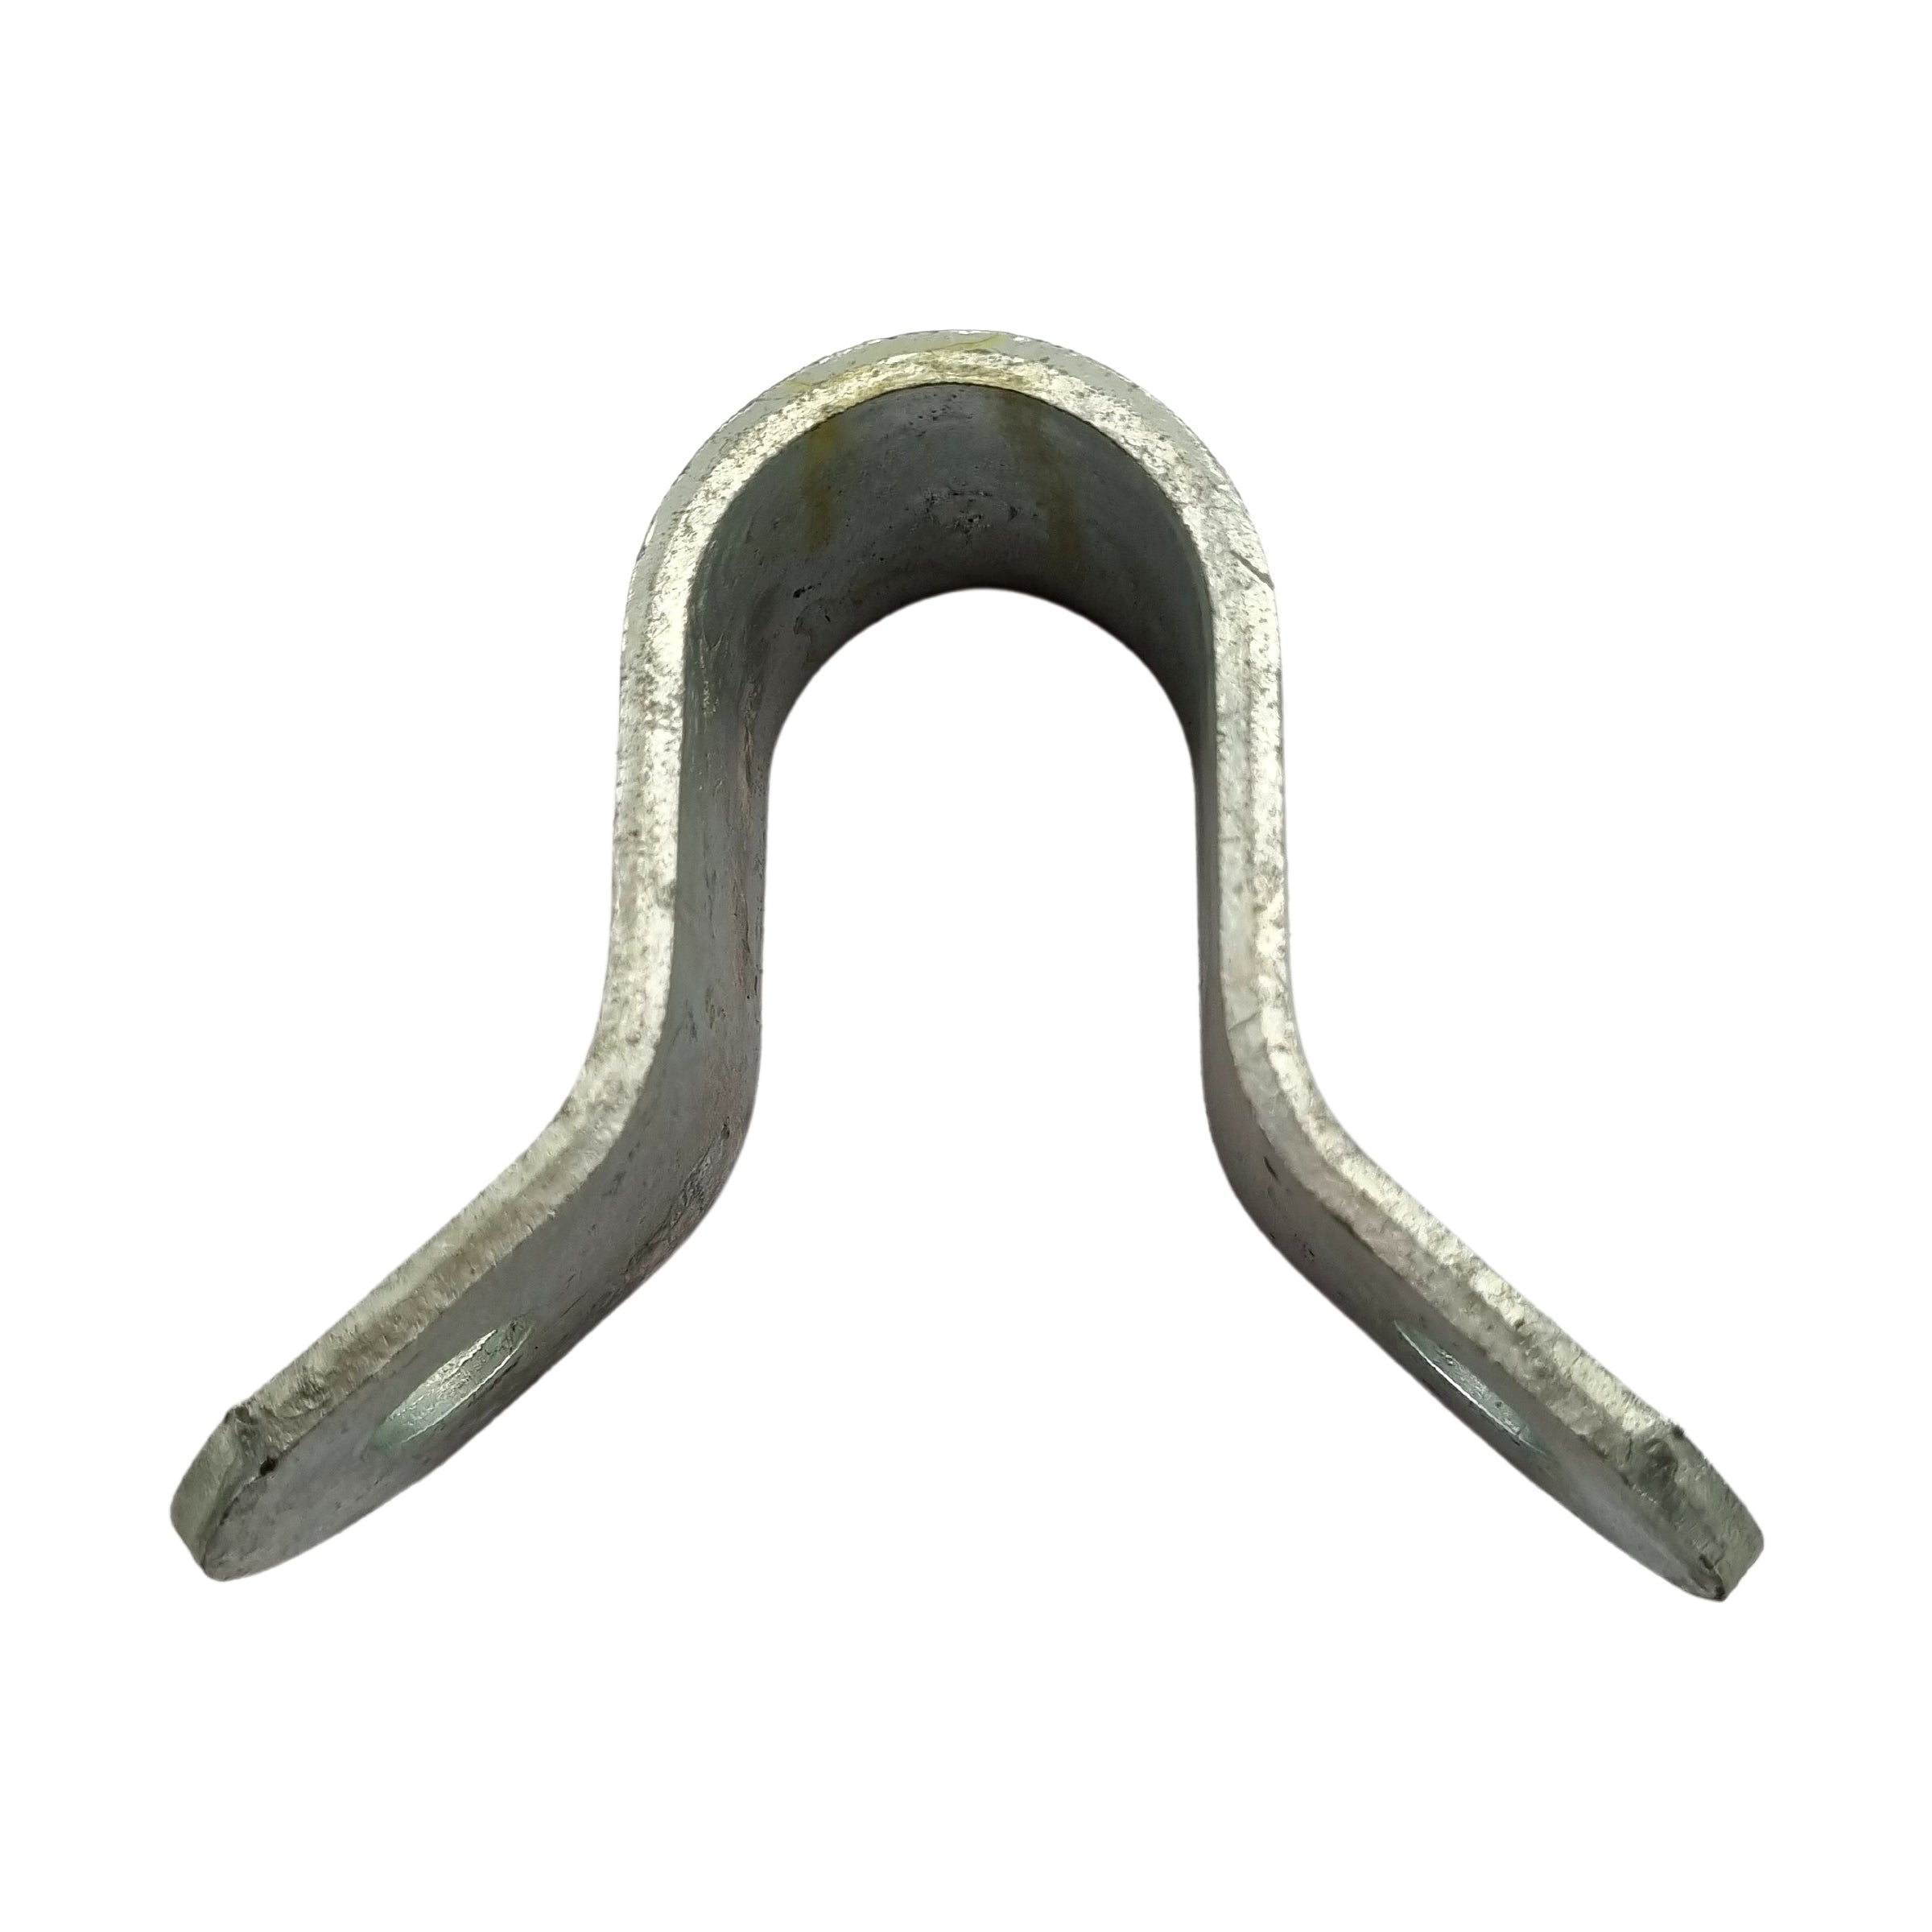 Angle Post Gudgeon Strap - Galvanised. Code: APS25. Size: 25NB. Australian made. Shop fence and gate fittings online. Chain.com.au. Australia wide shipping.